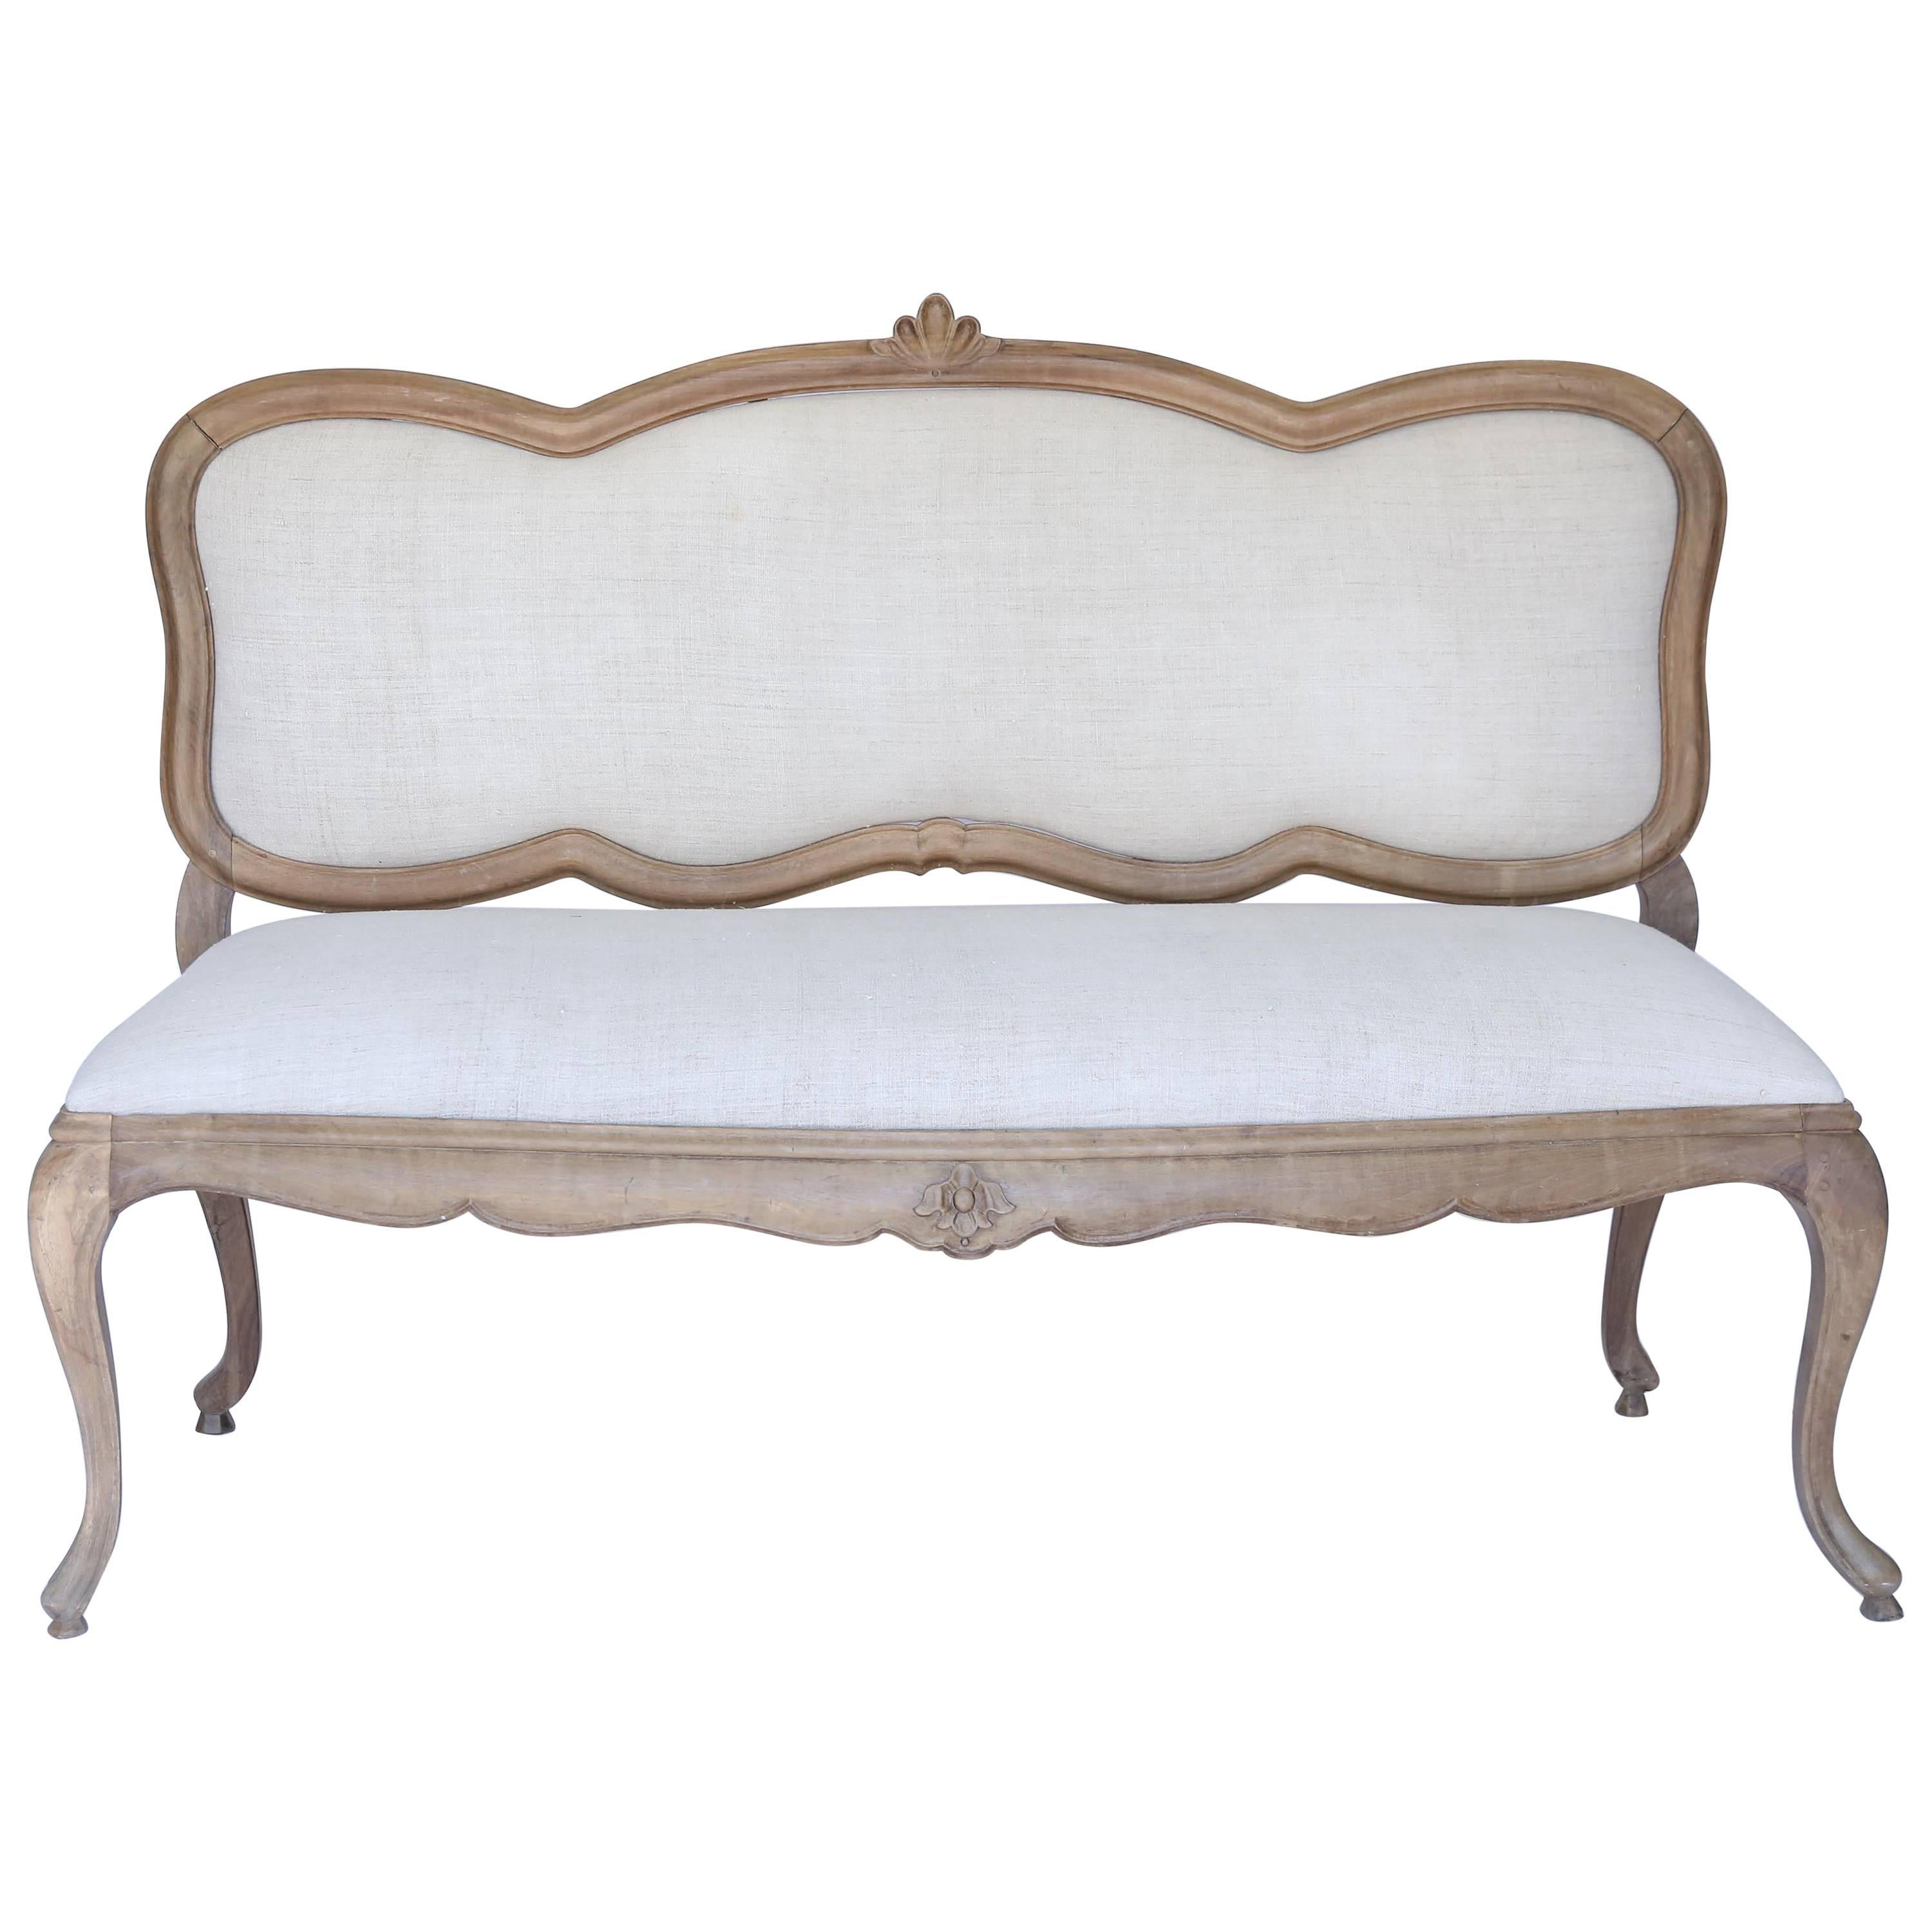 Antique French Bench, Newly Upholstered